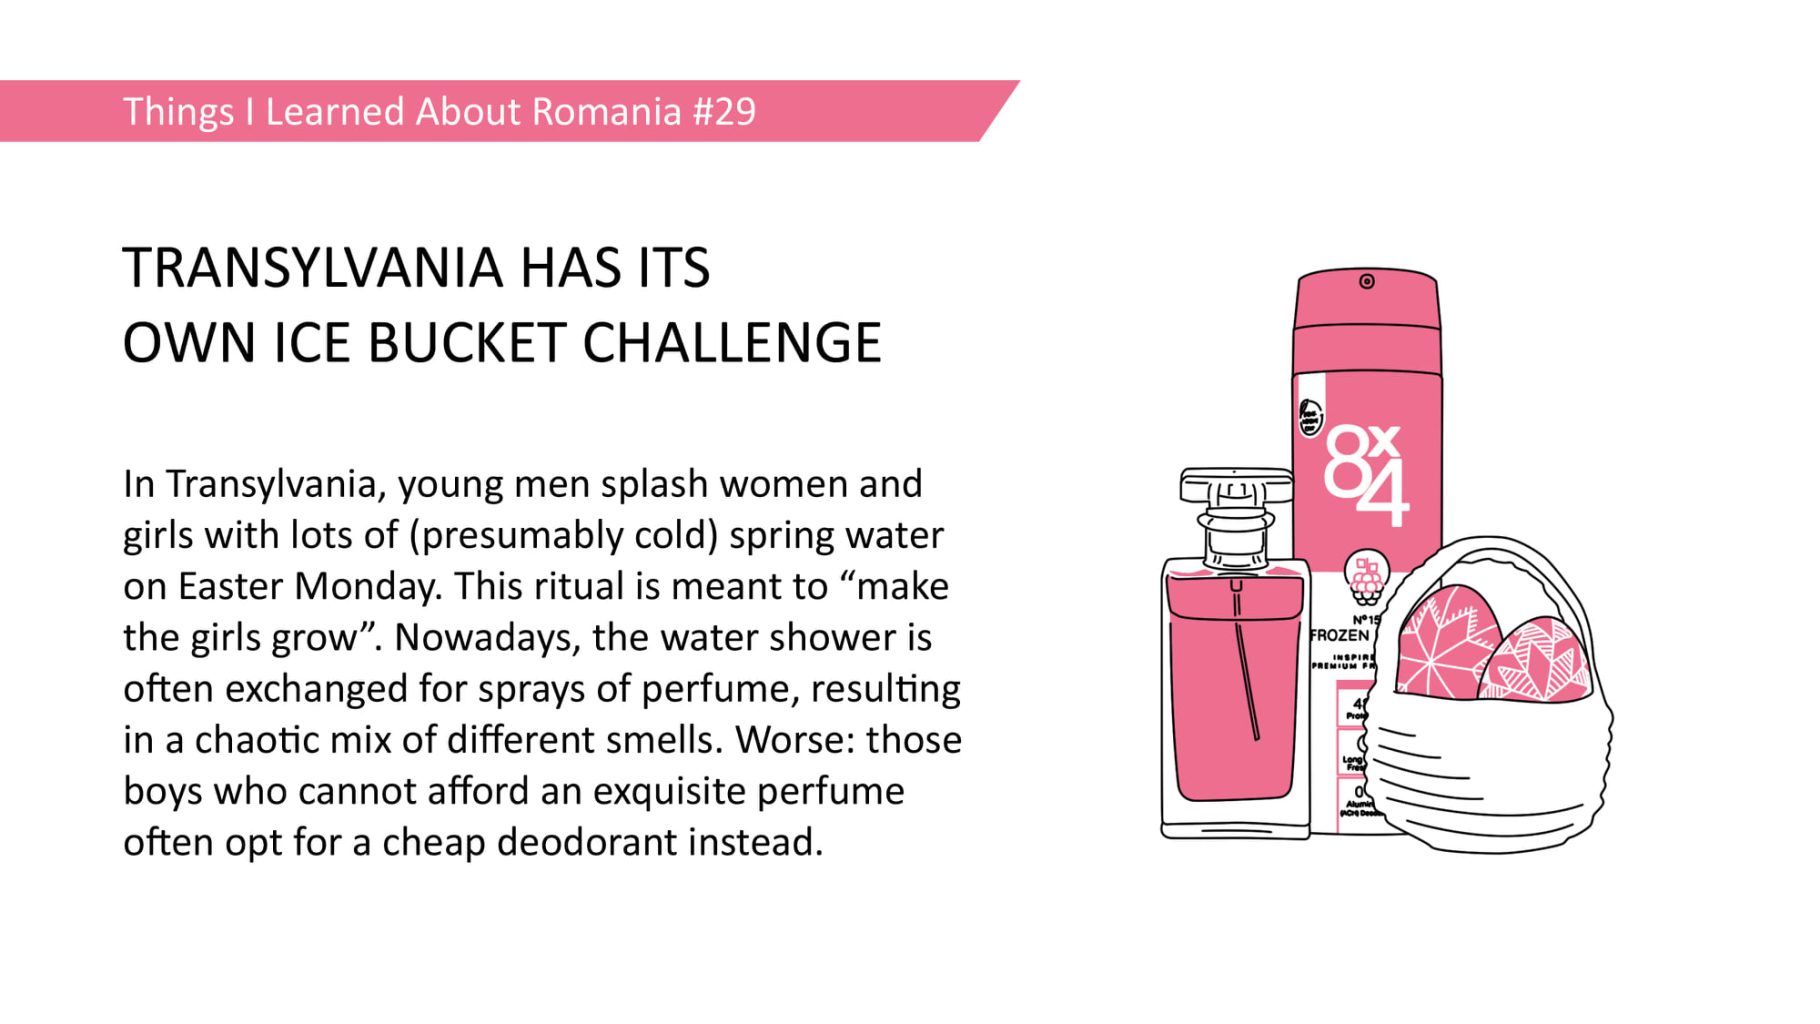 TRANSYLVANIA HAS ITS OWN ICE BUCKET CHALLENGE - In Transylvania, young men splash women and girls with lots of (presumably cold) spring water on Easter Monday. This ritual is meant to "make the girls grow". Nowadays, the water shower is often exchanged for sprays of perfume, resulting in a chaotic mix of different smells. Worse: those boys who cannot afford an exquisite perfume often opt for a cheap deodorant instead.